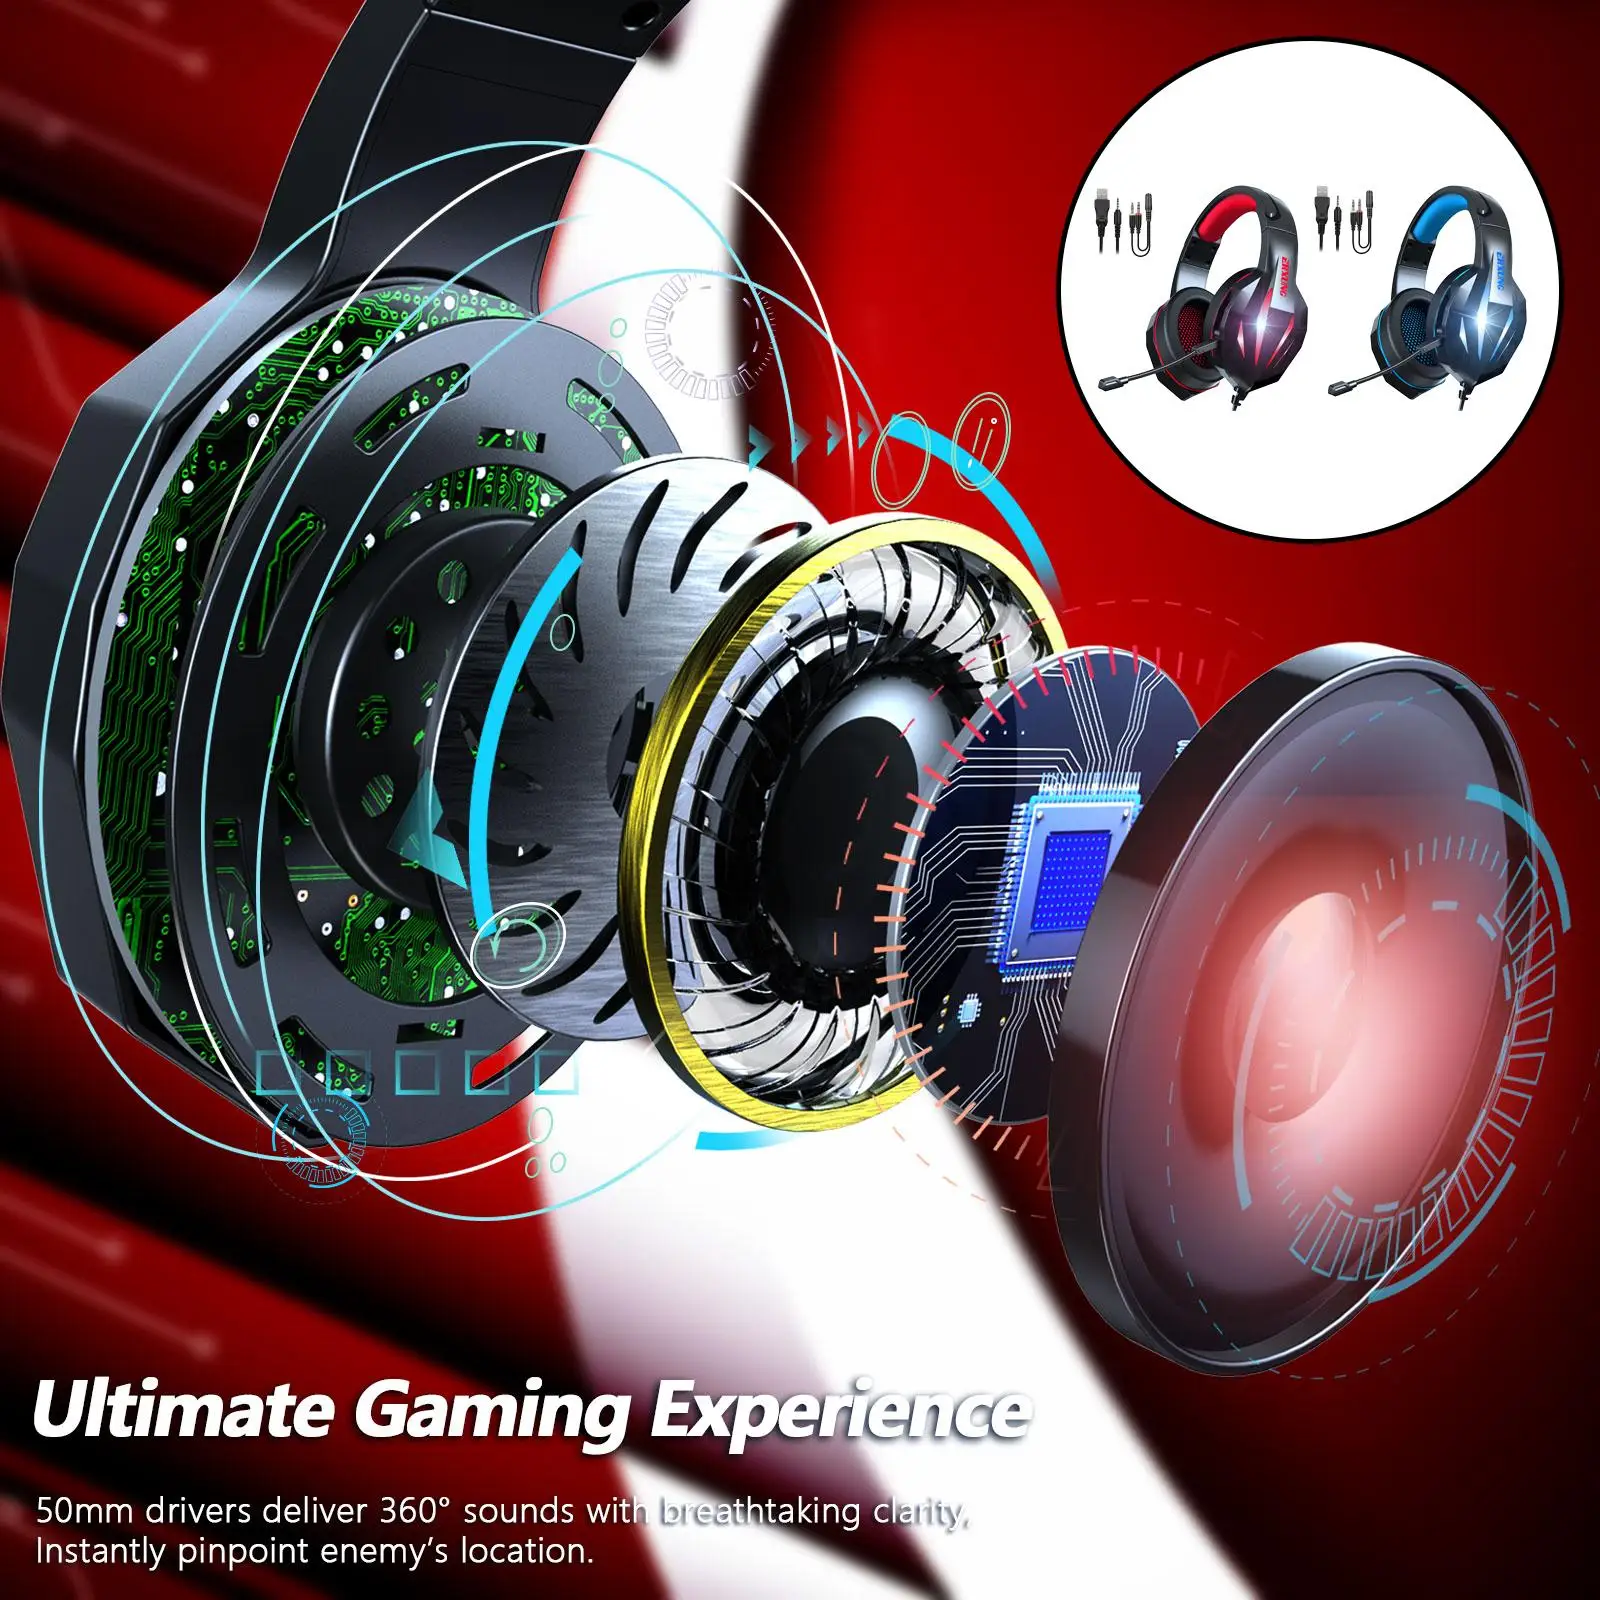 Stereo LED Over-Ear Gaming Headset Headphones 4 Surround 3.5mm Plug 4 5 Controller PC Laptop Computer Games Gamer Mobile Phone